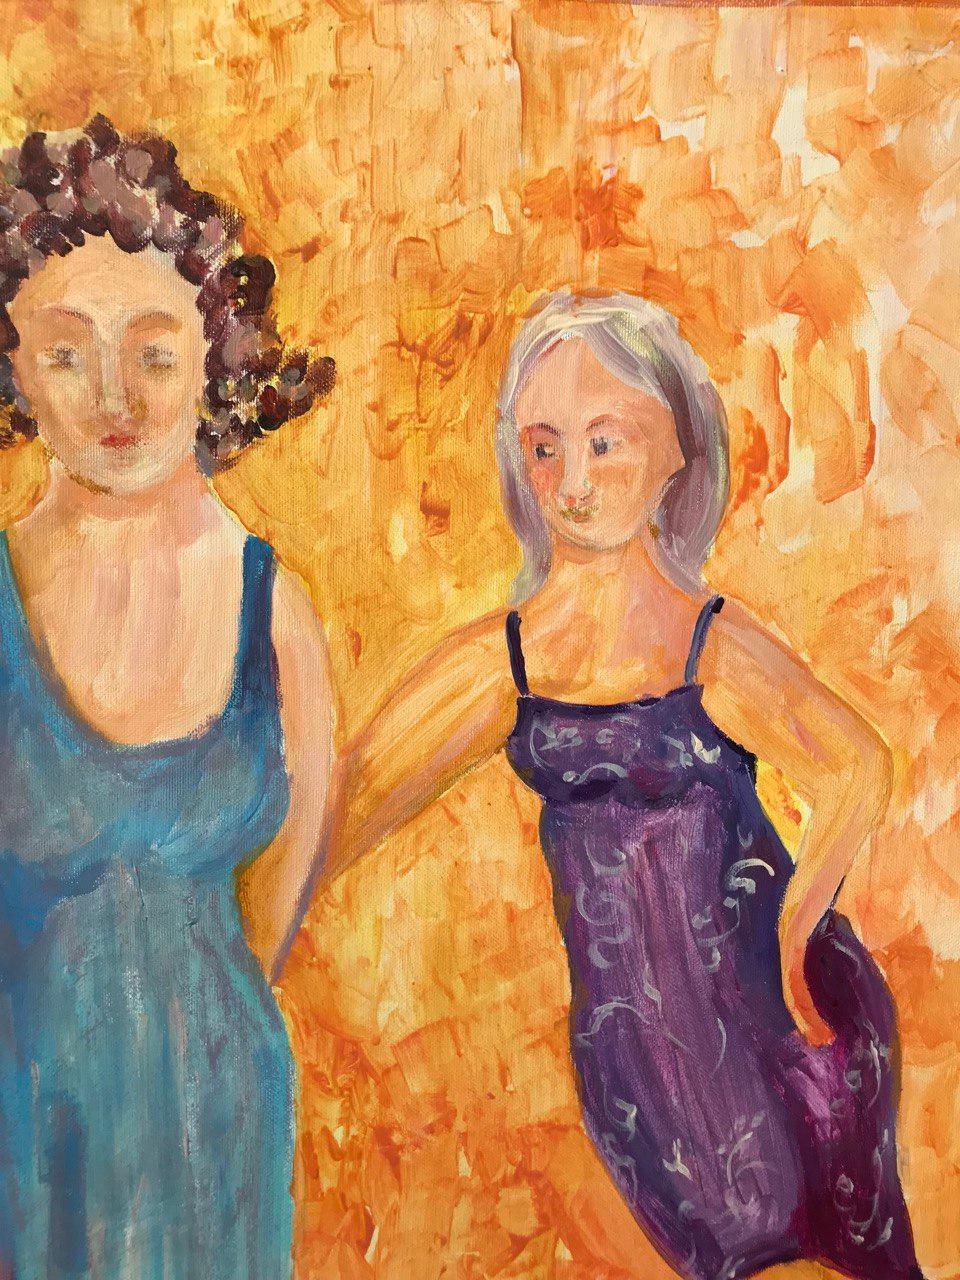 Sisters' Embrace, Happiness Series: Journey to Inner Peace original painting  - Contemporary Painting by Tetiana Pchelnykova